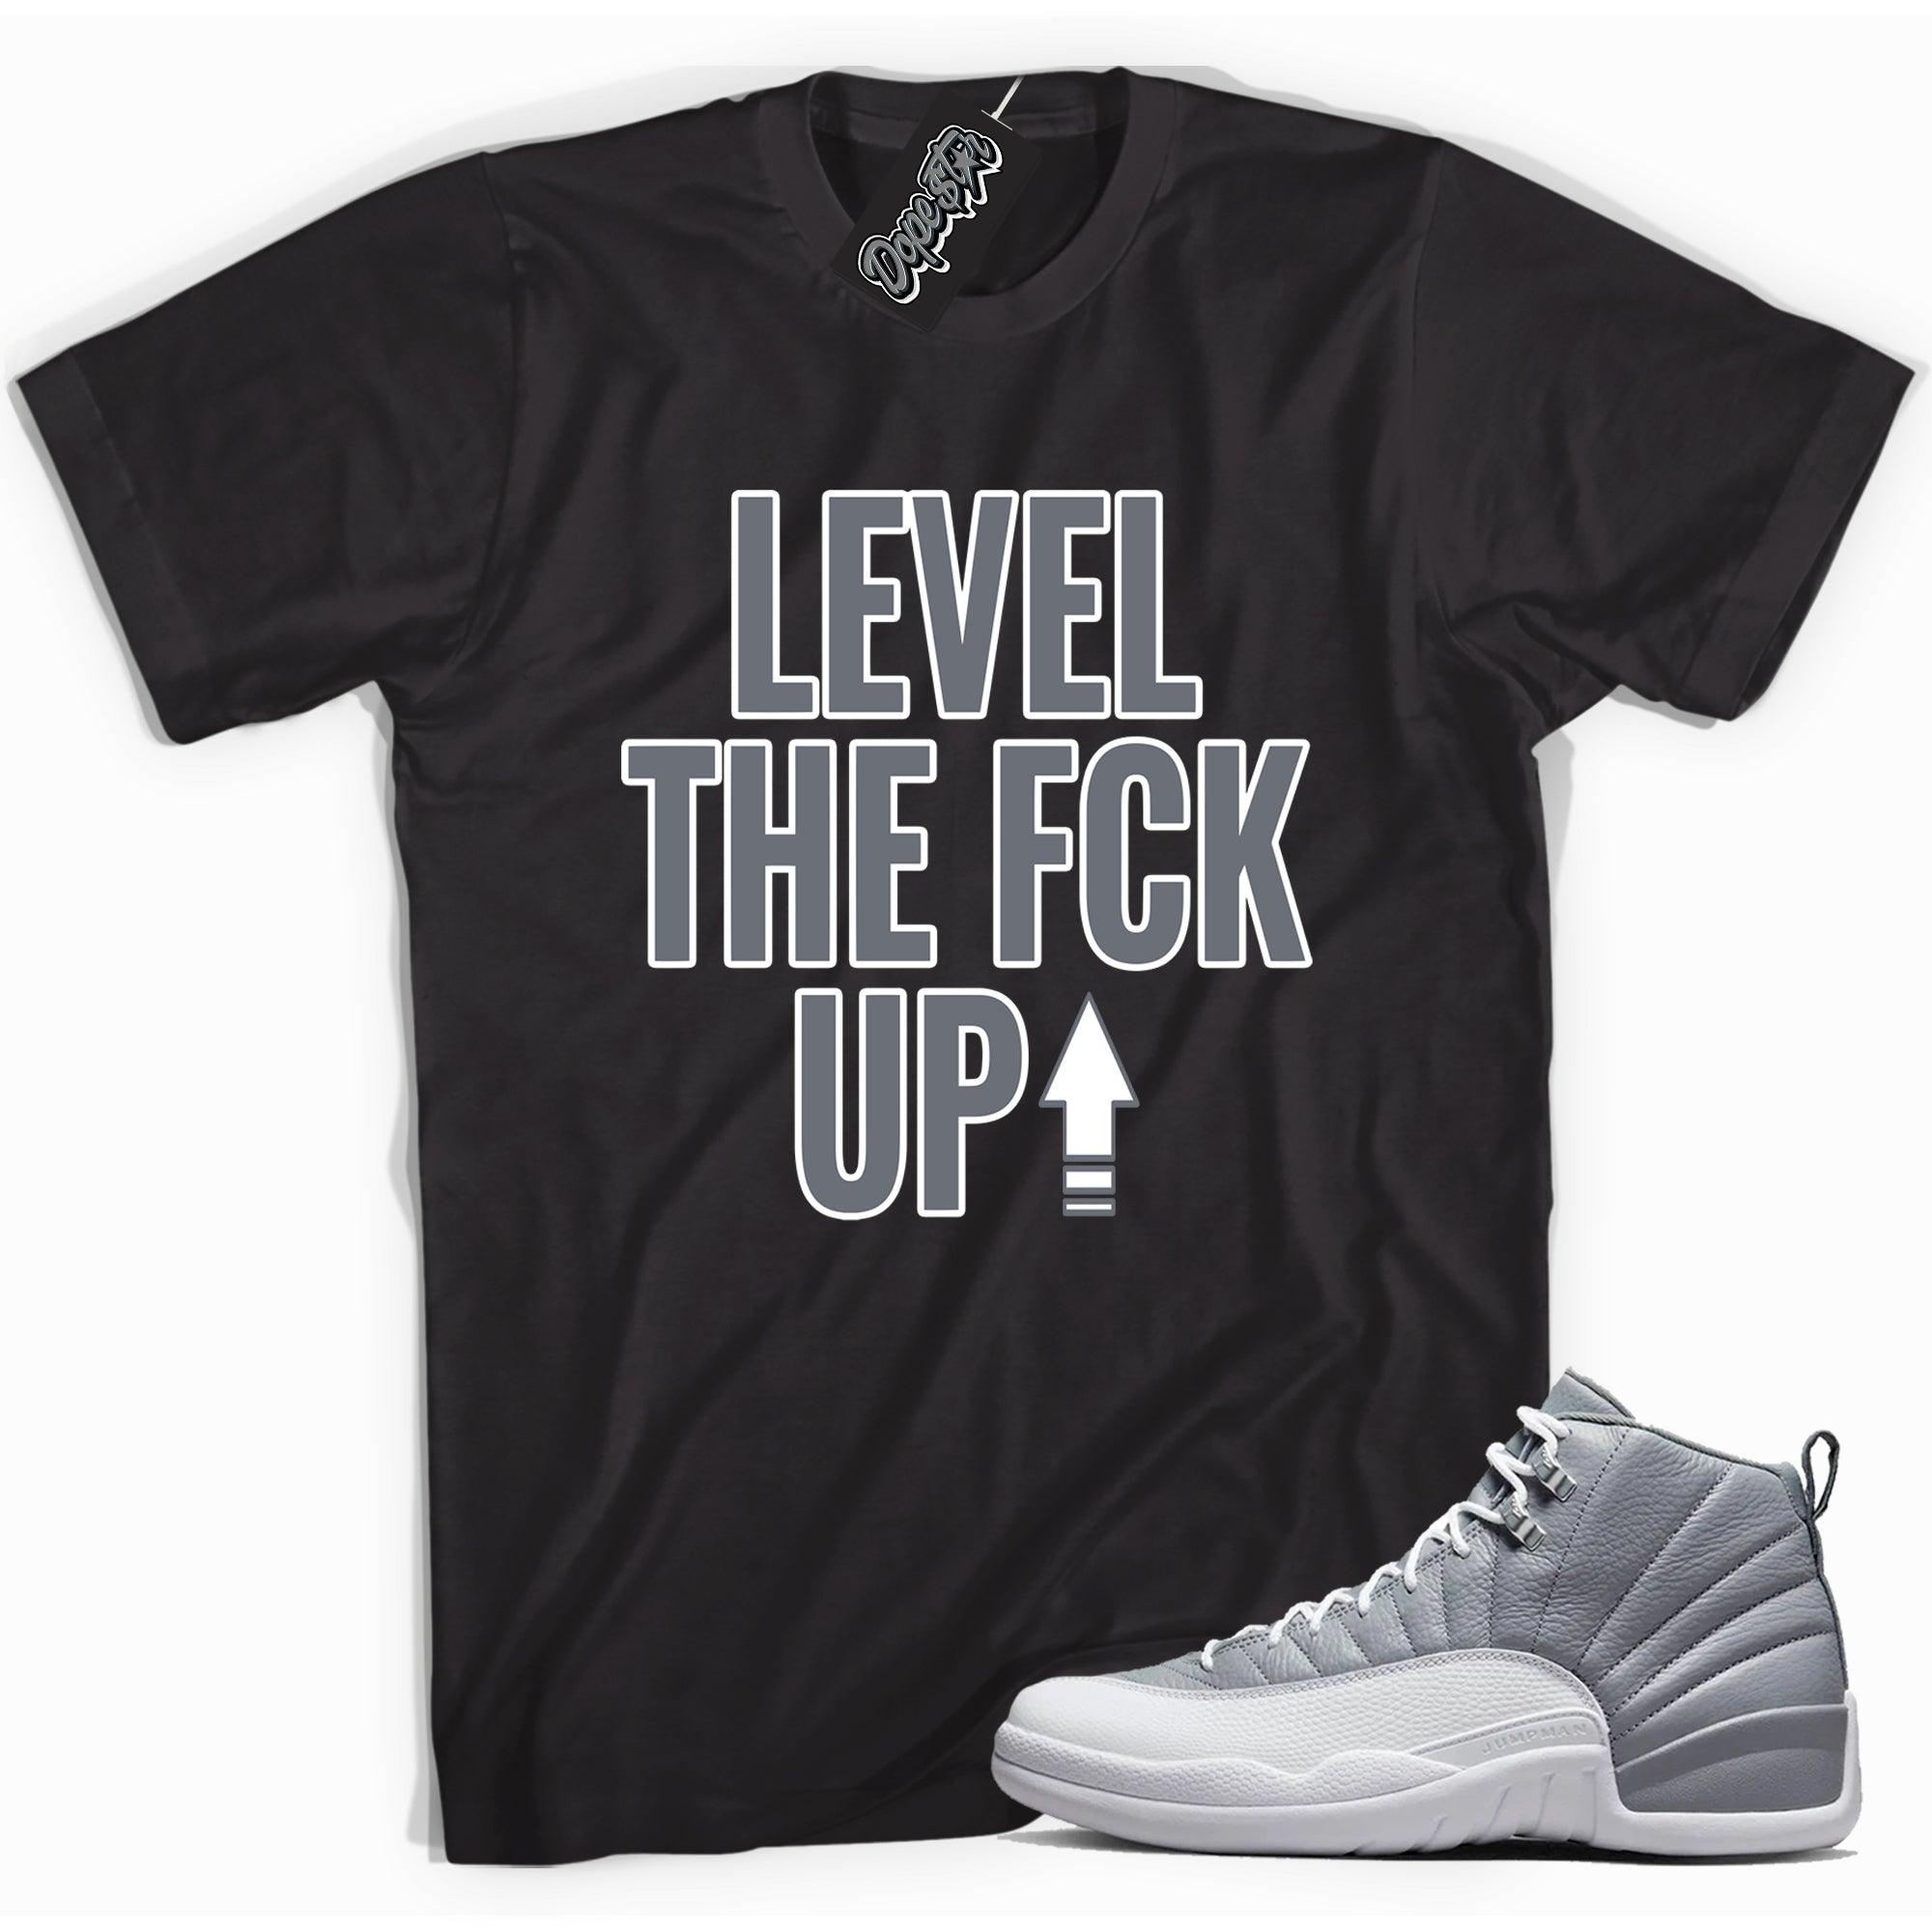 Cool black graphic tee with 'Level Up' print, that perfectly matches  Air Jordan 12 Retro Stealth sneakers.